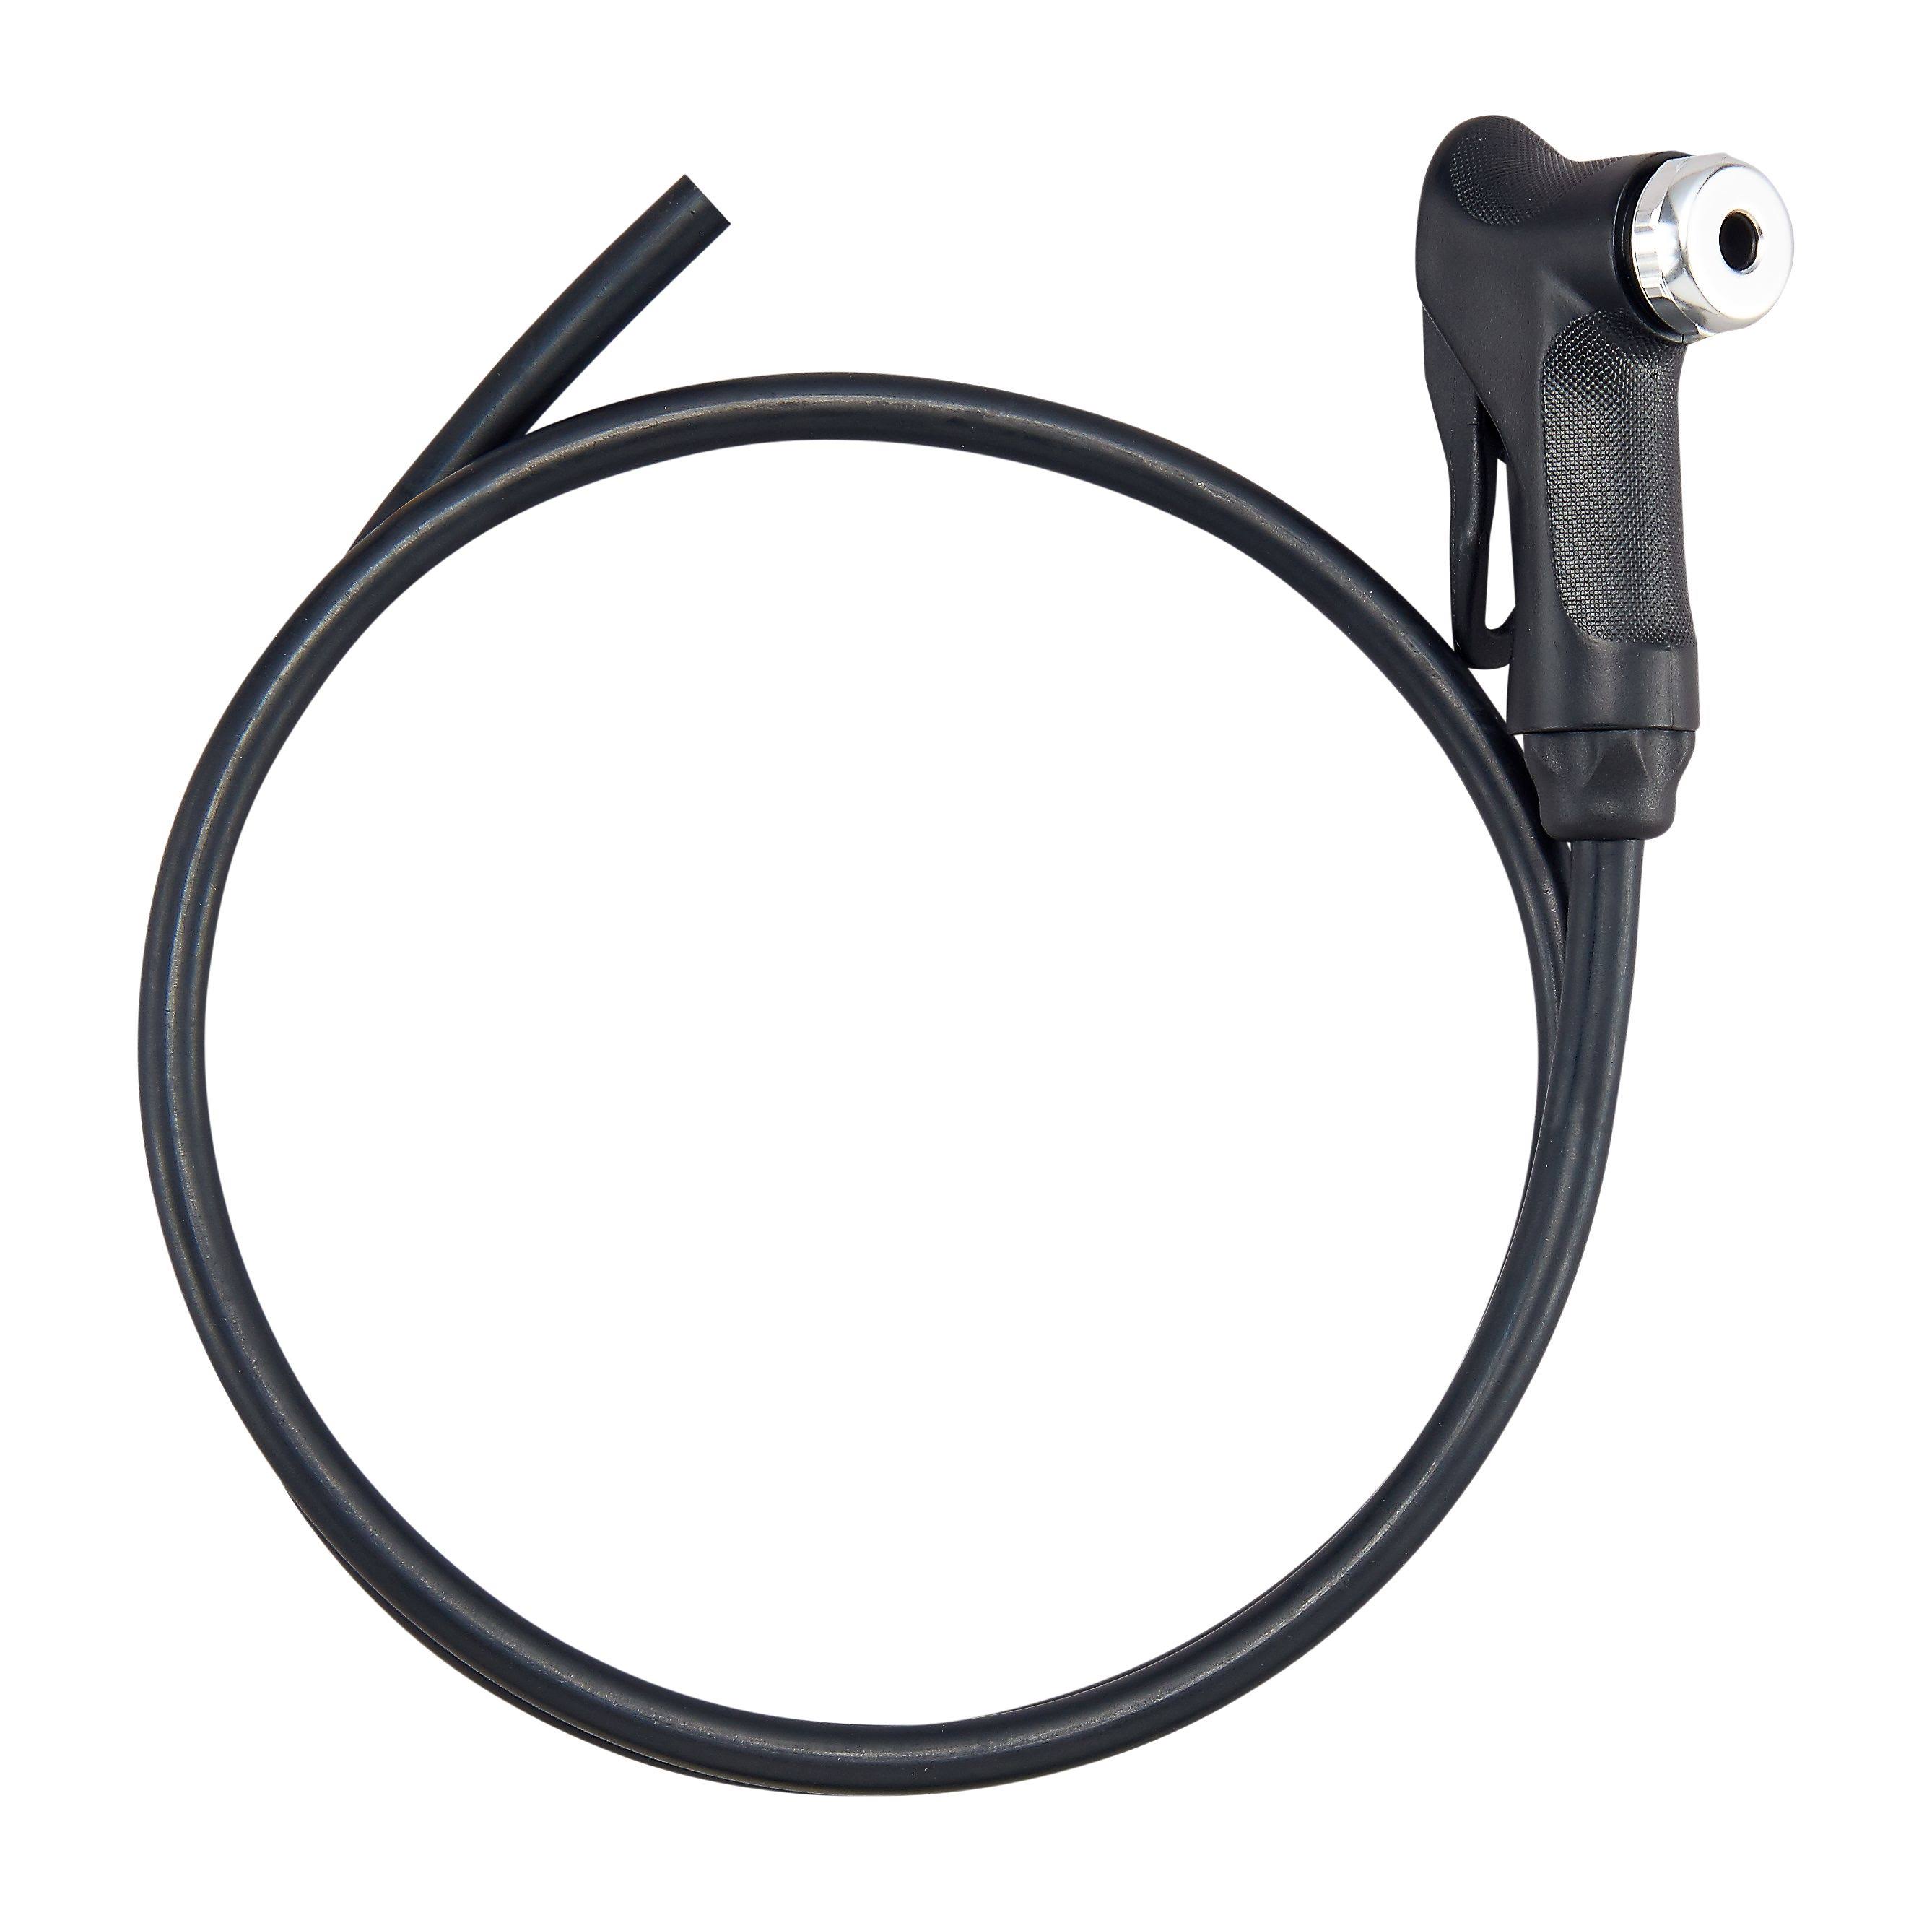 Specialized Replacement Head & Hose For Comp/hp/mtb Floor Pump